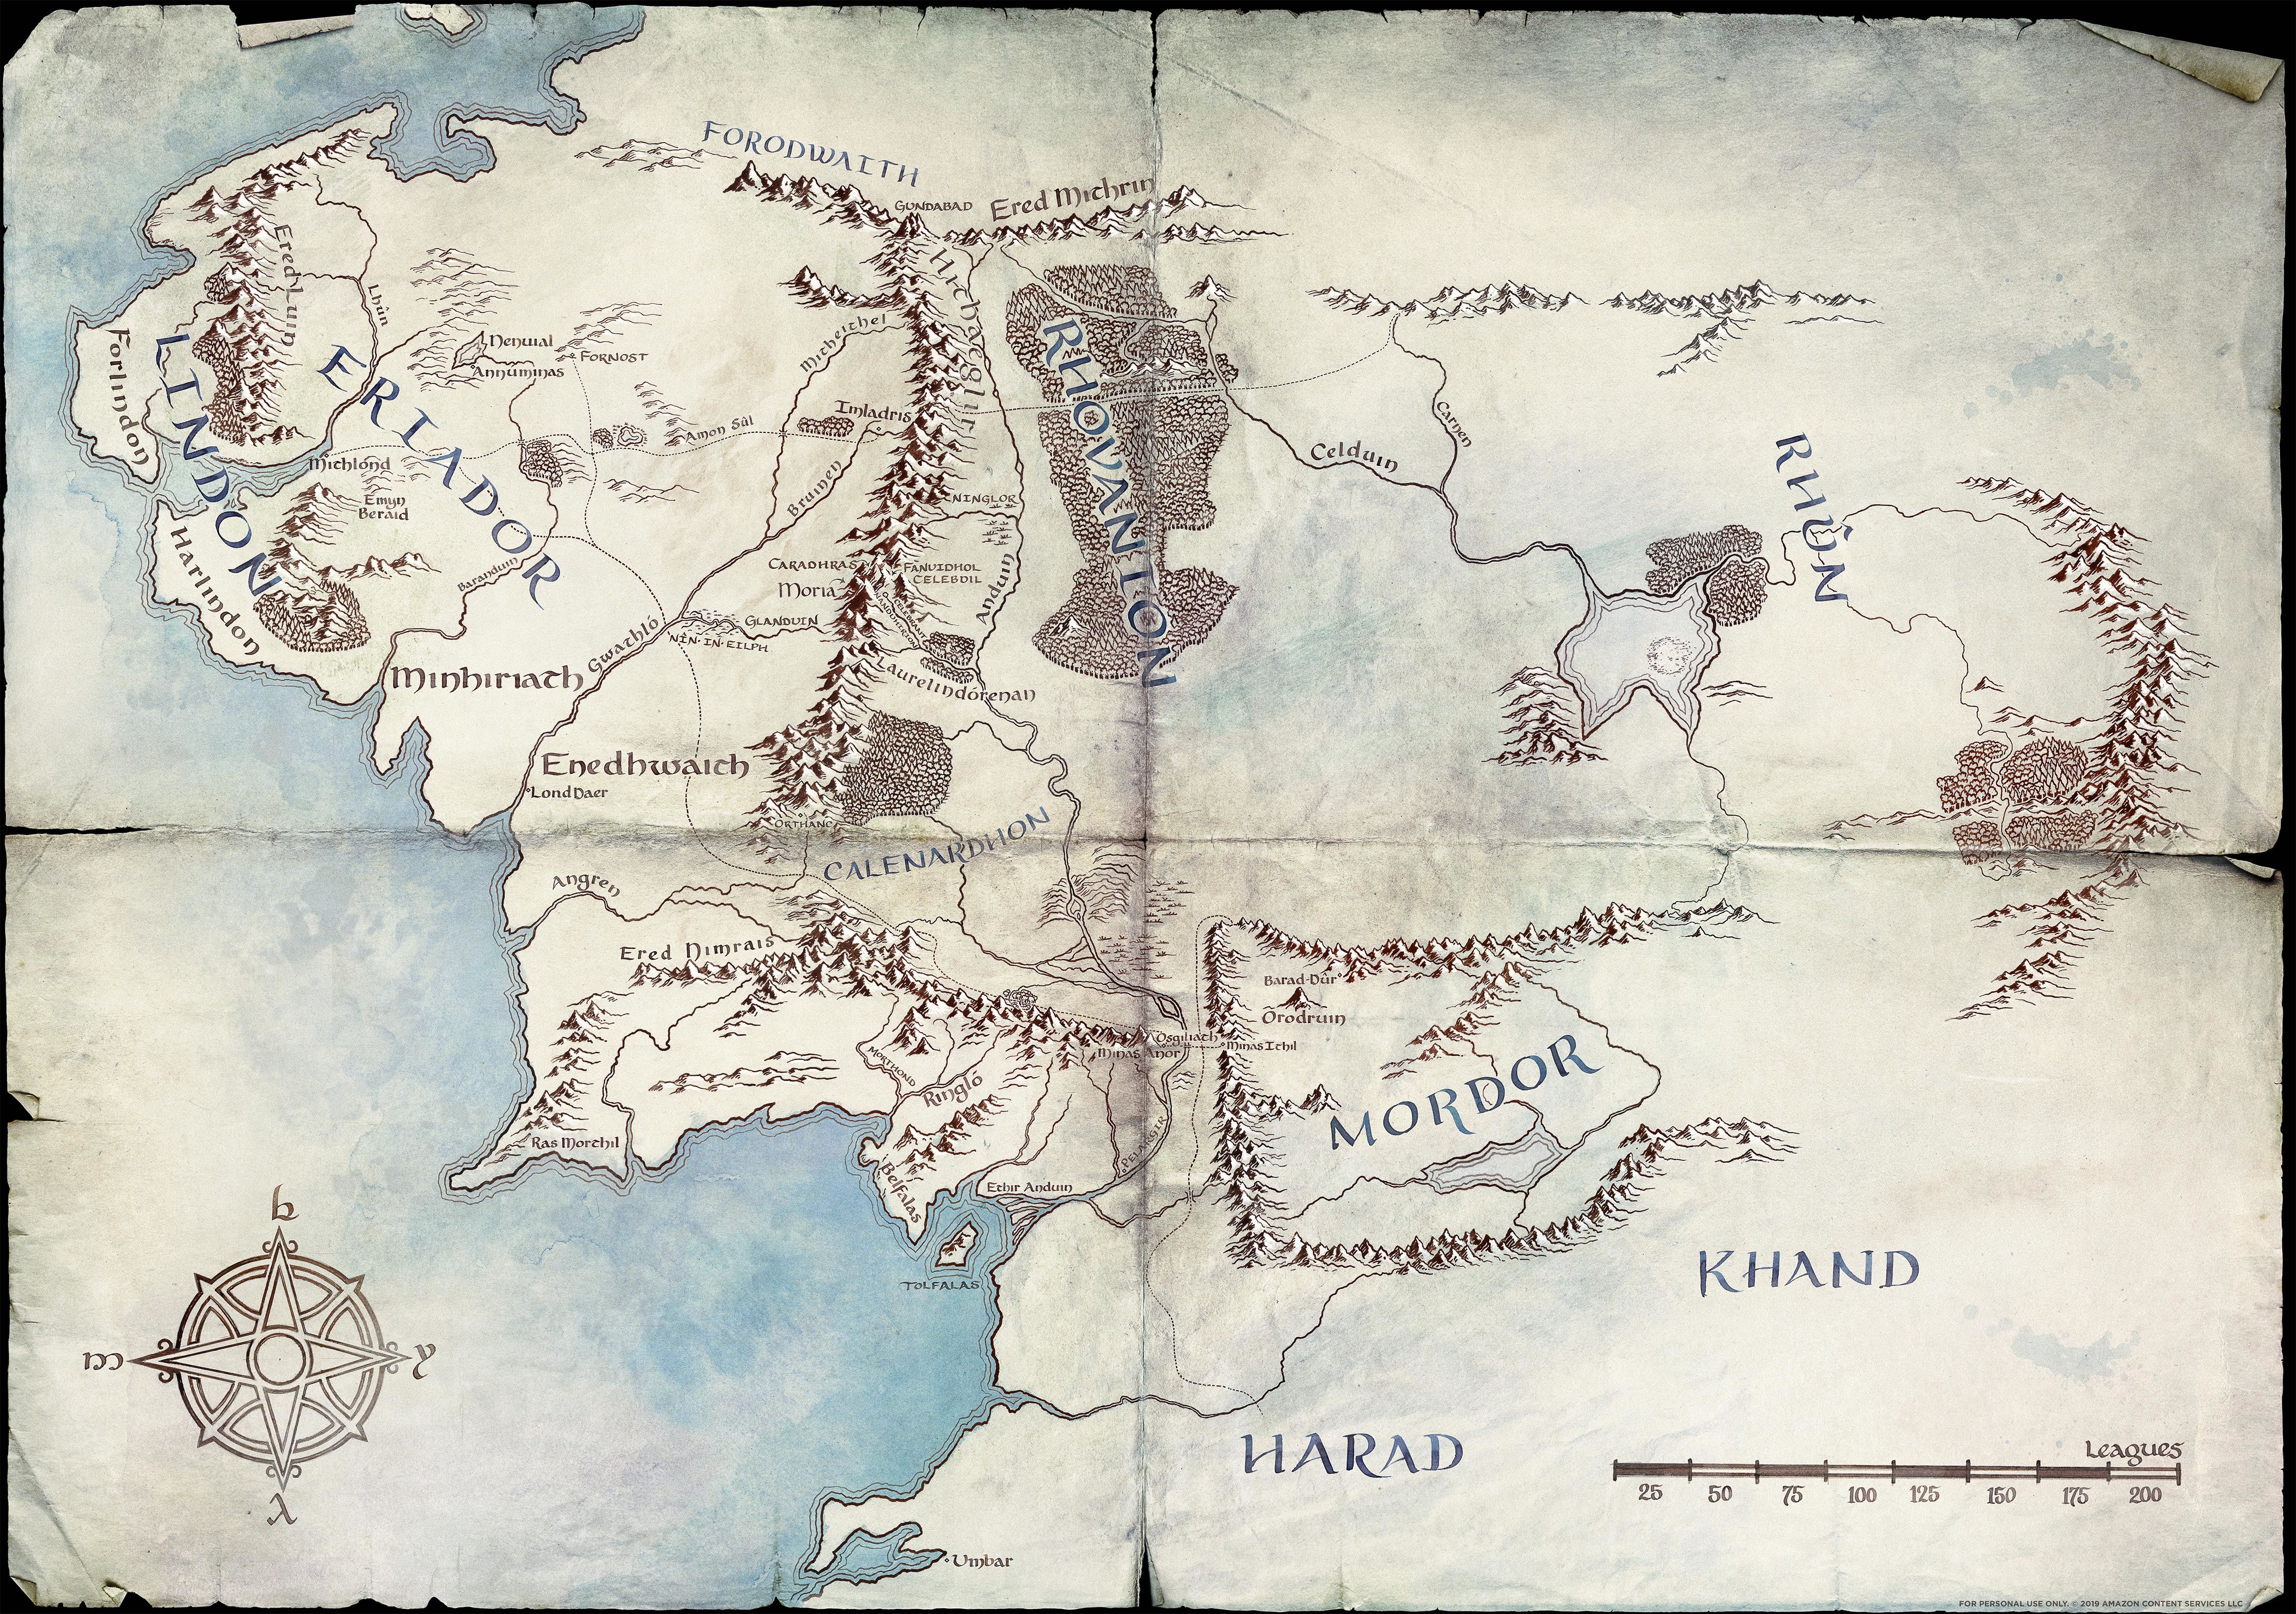 Lord of the Rings amazon map label